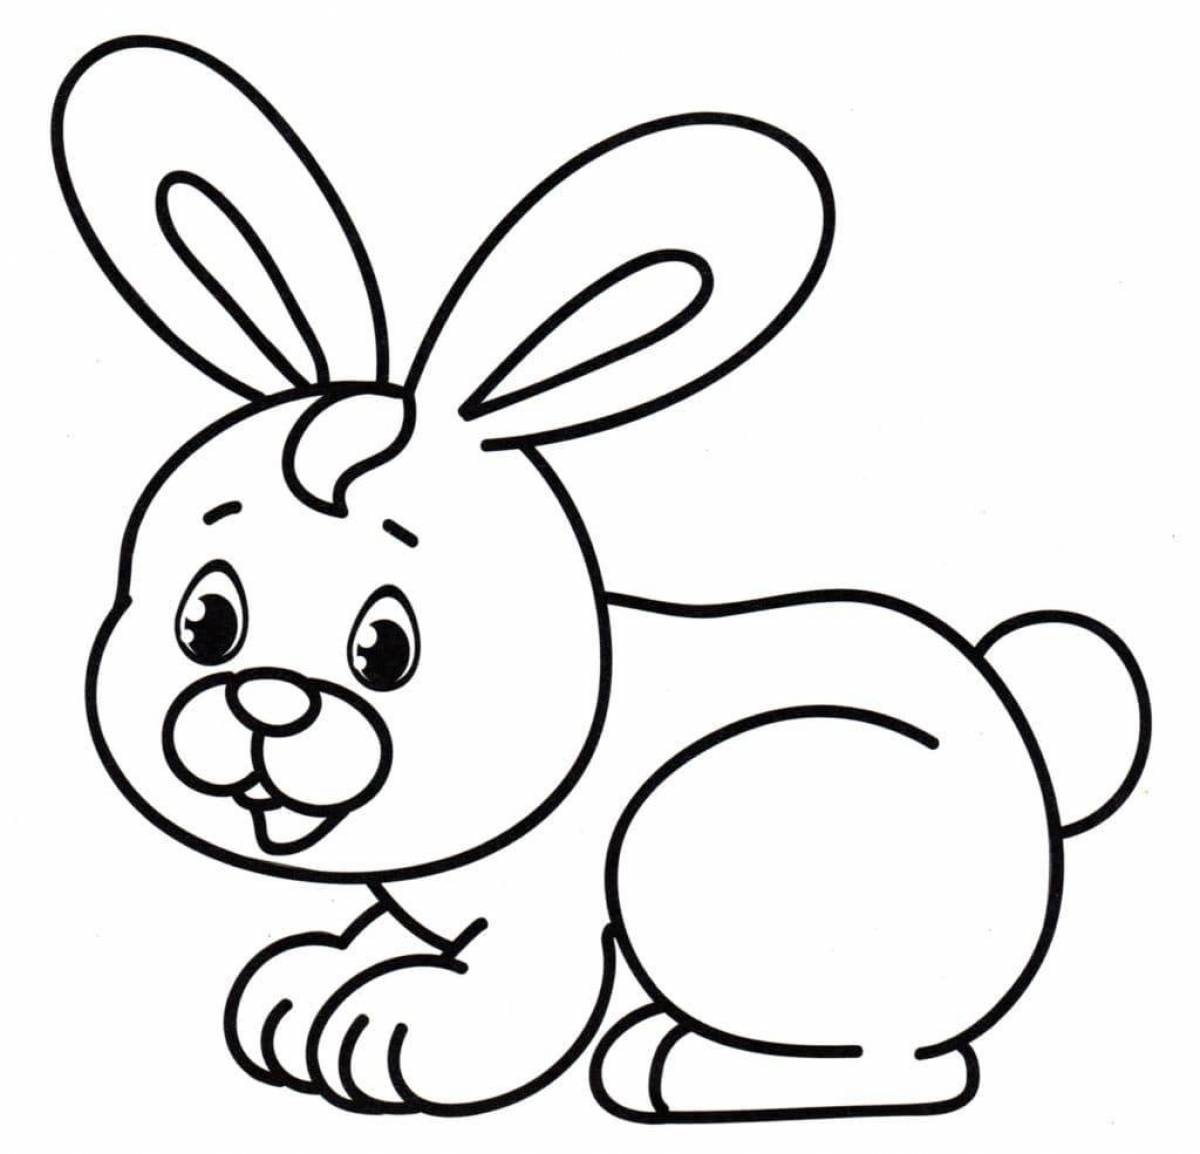 Bunny for children 3 4 years old #3